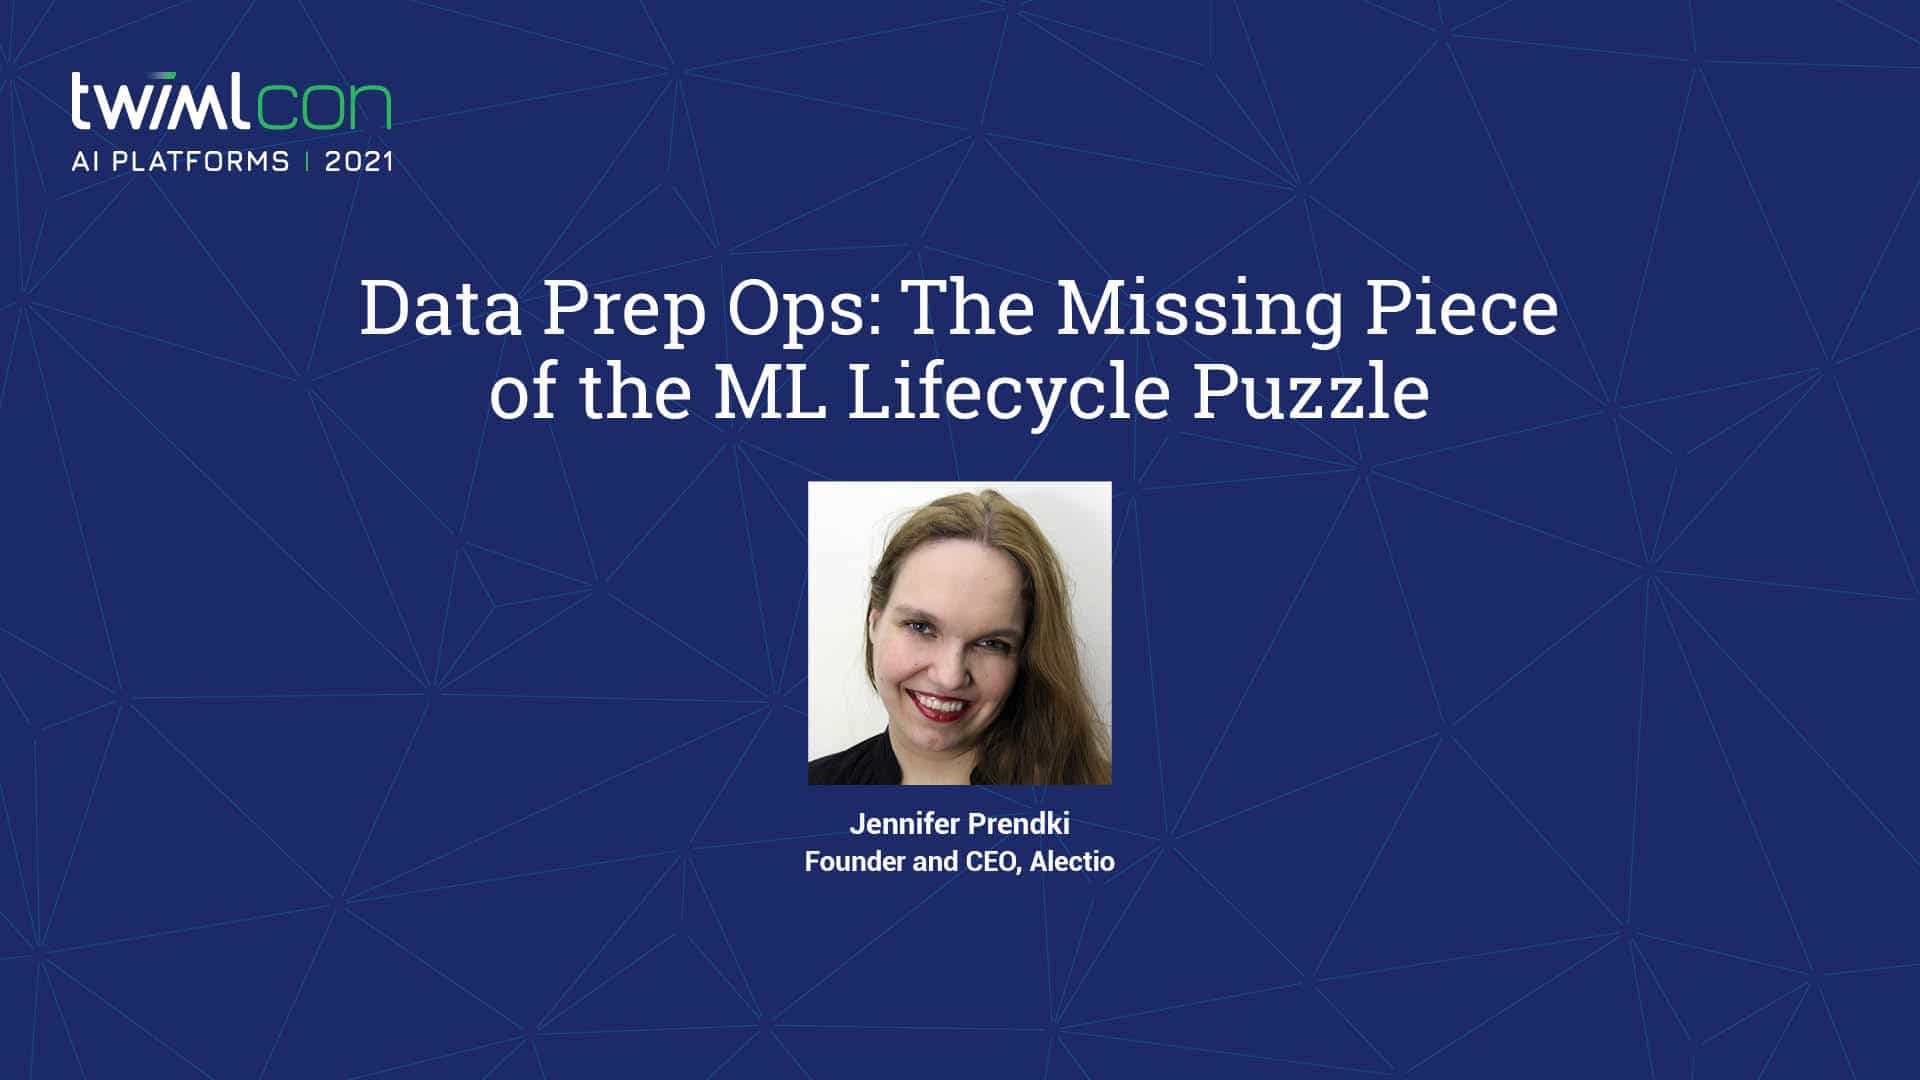 Data Prep Ops: The Missing Piece of the MLOps Puzzle